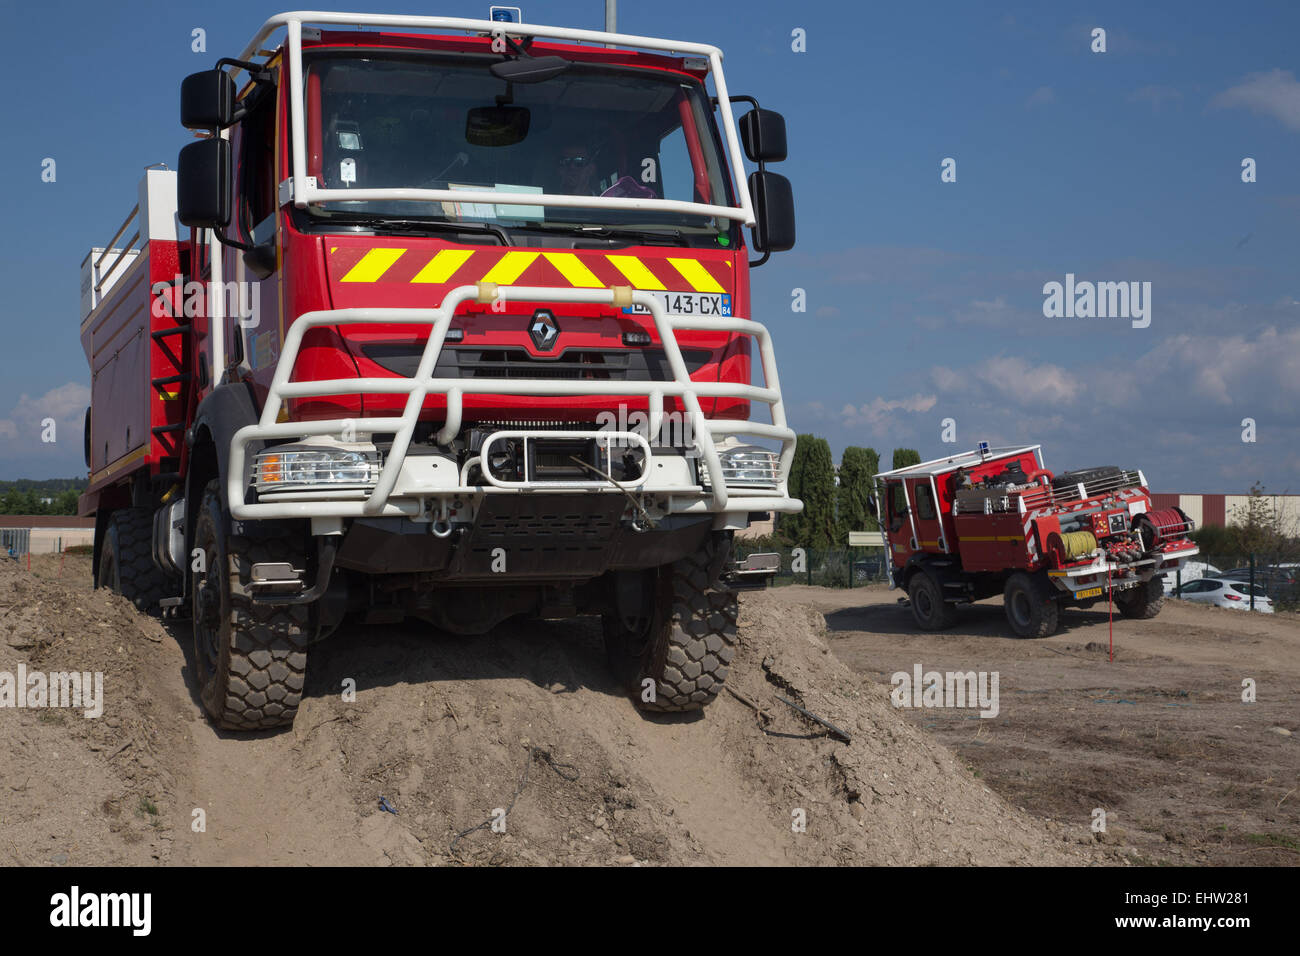 FOREST FIRE TANKER TRUCK Stock Photo